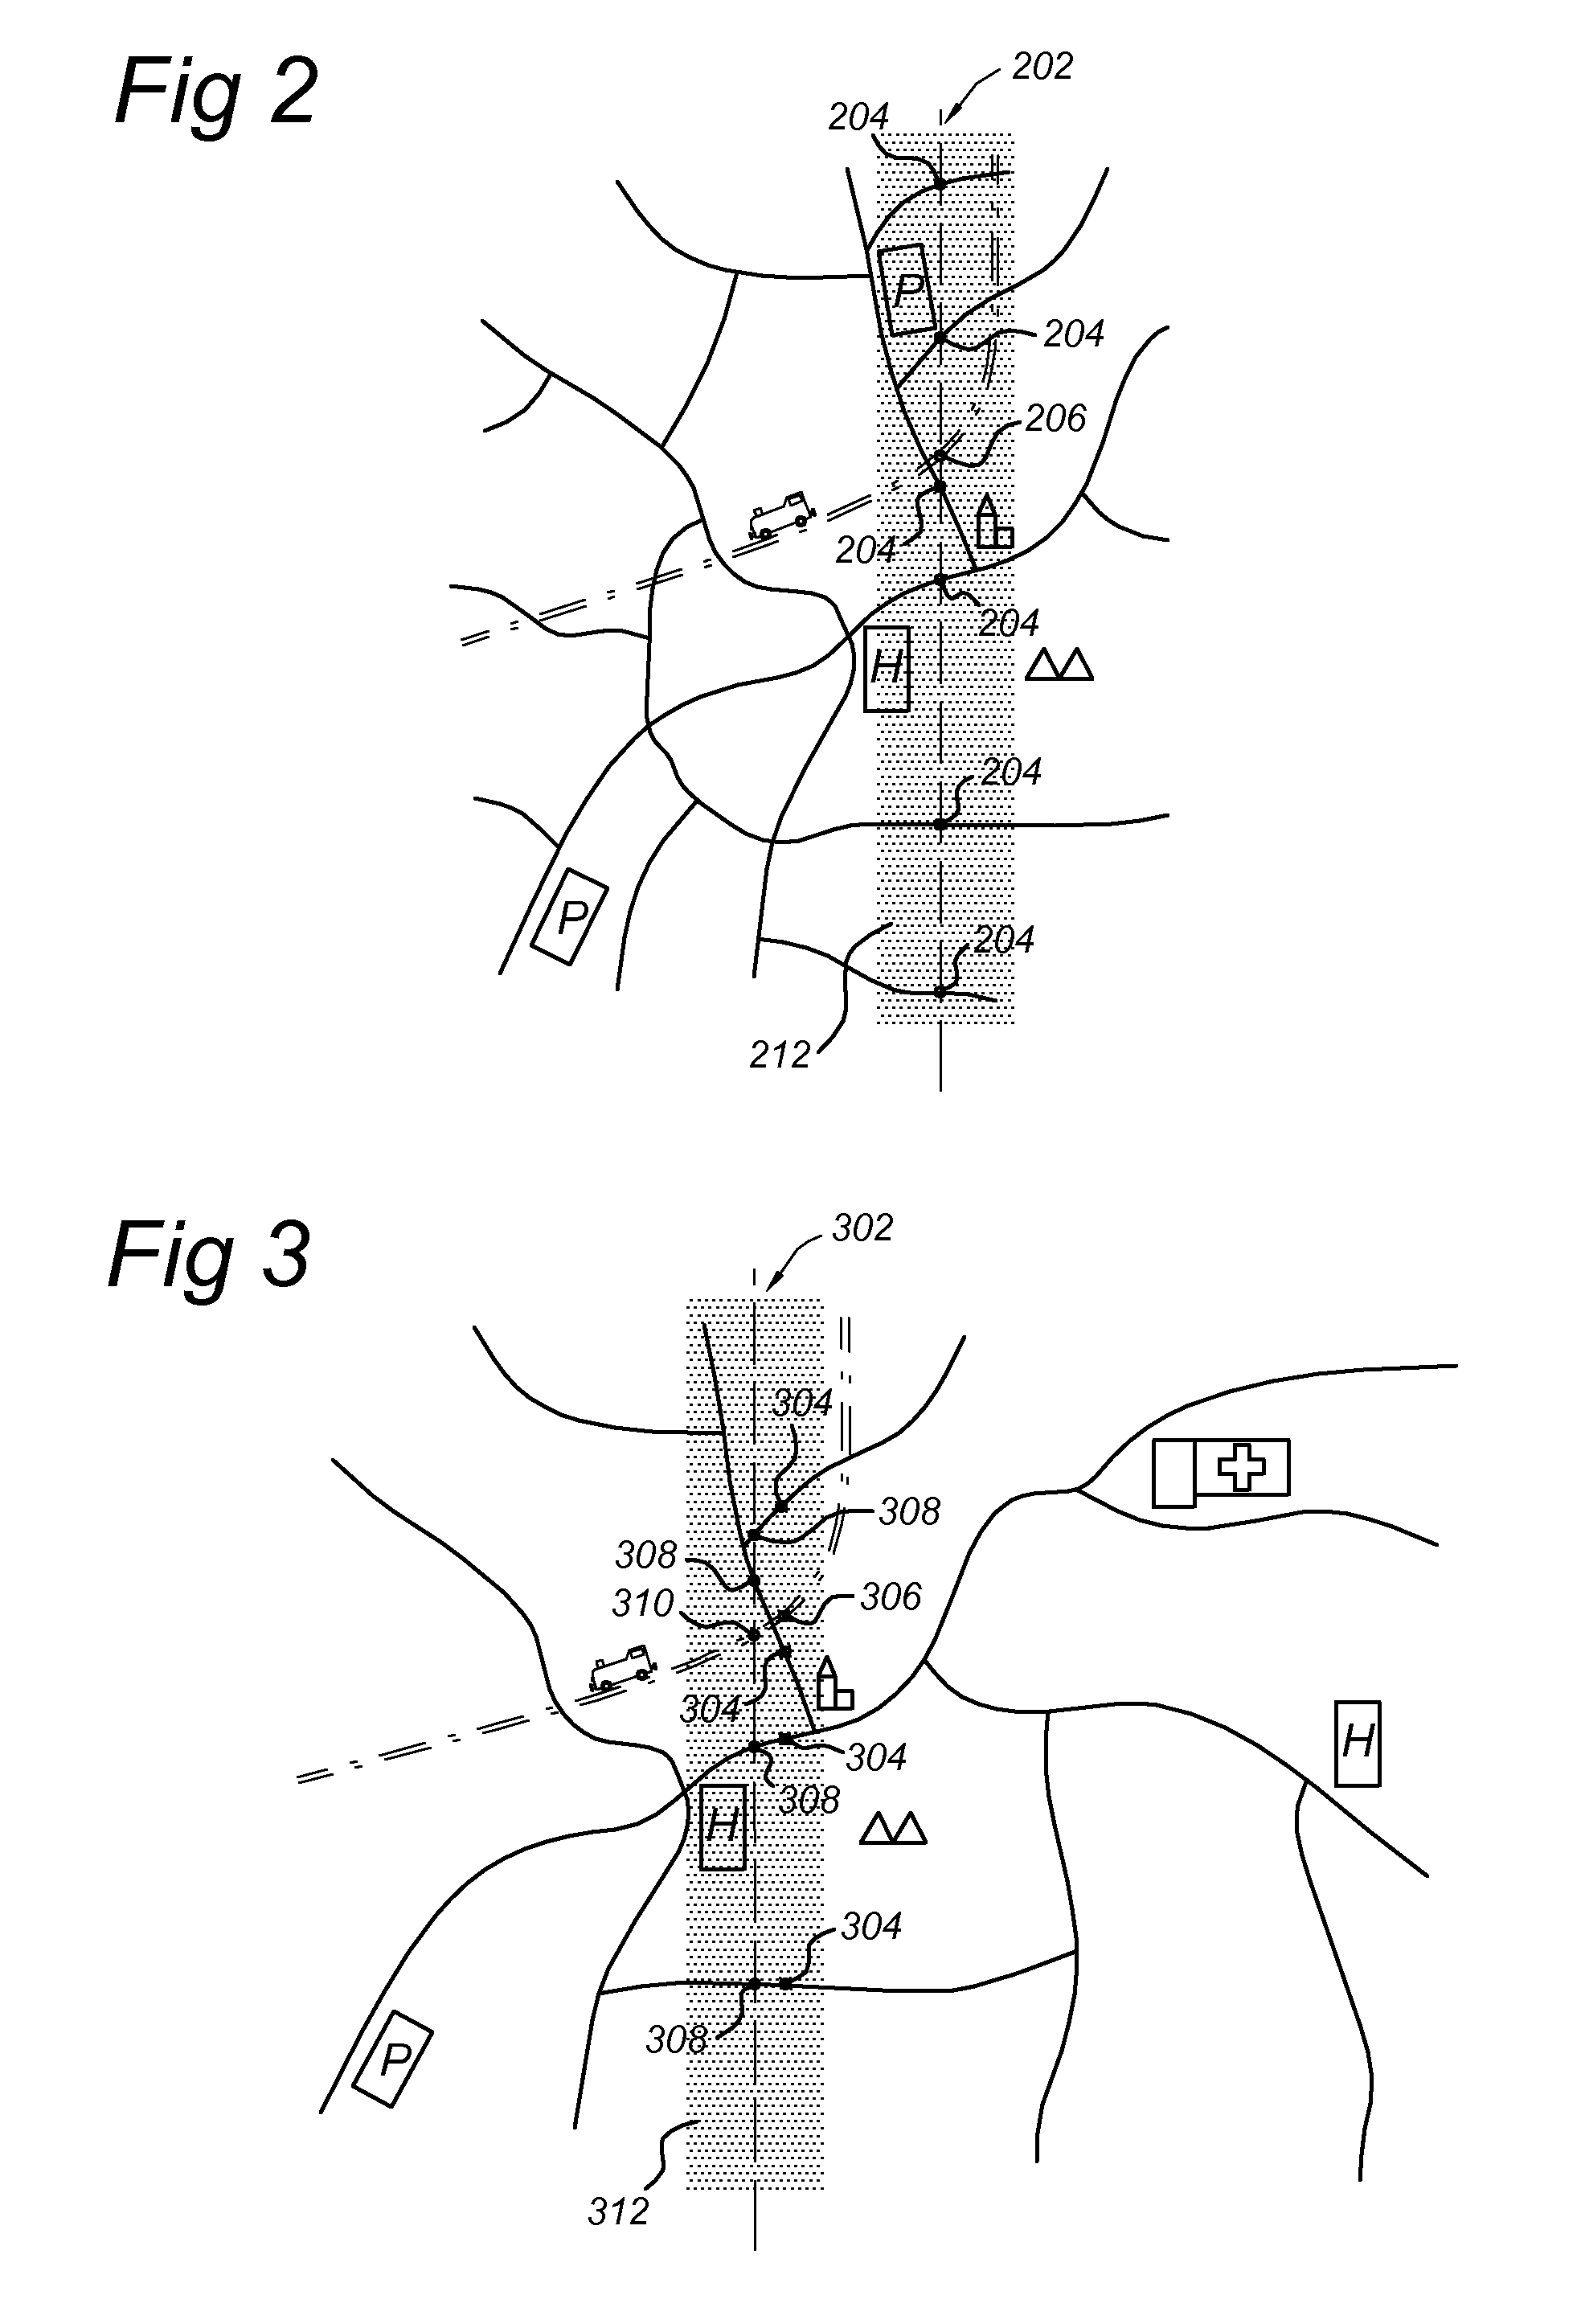 Method and apparatus for combining a first partition from a first digital map database and a second partition from a second digital map database